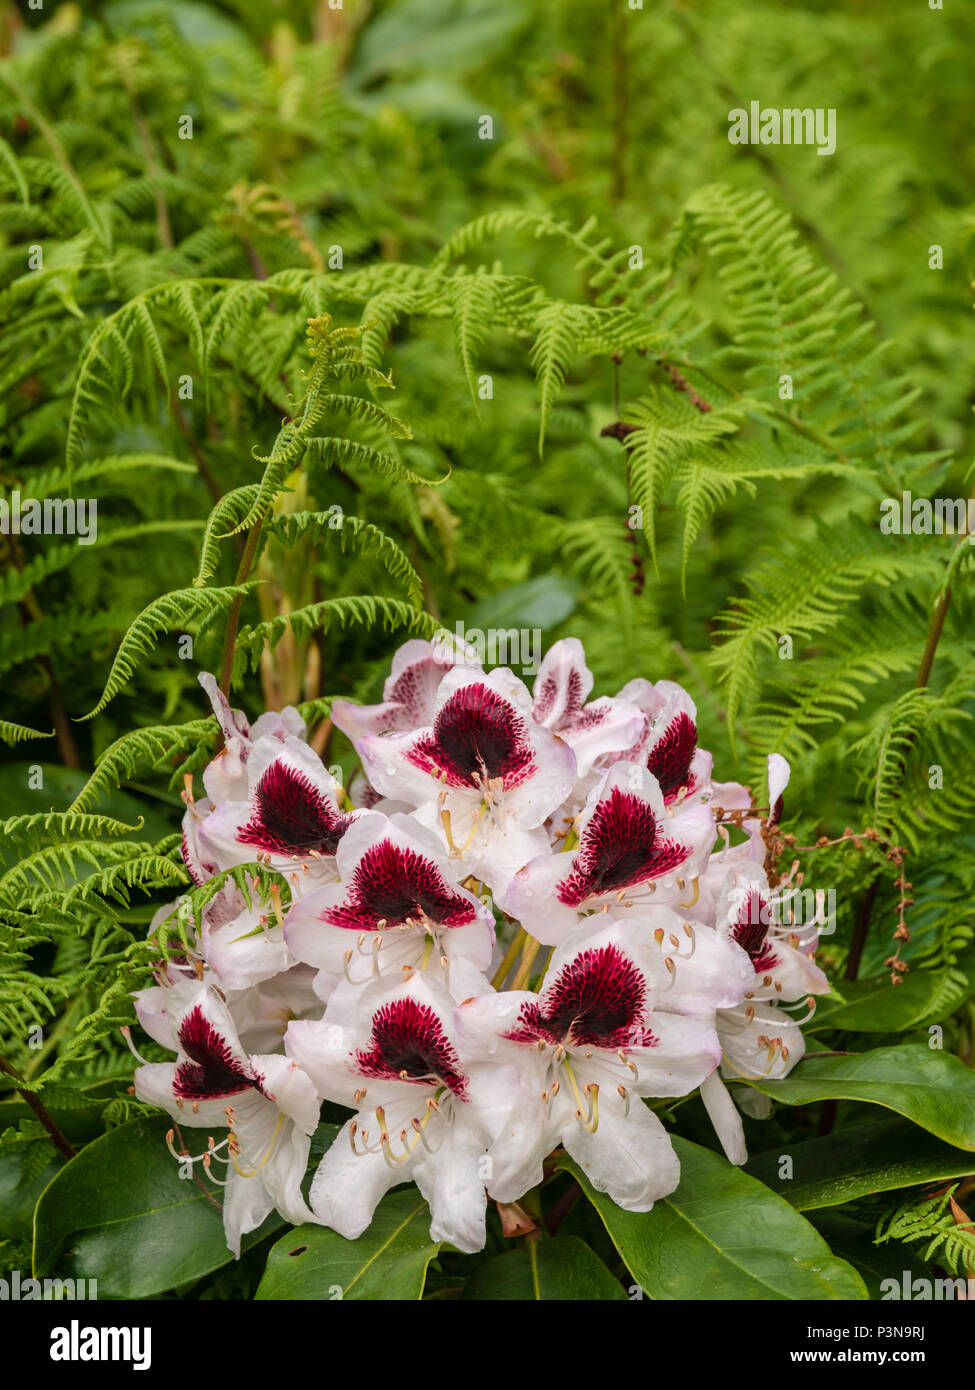 A colourful rhododendron flower in among some ferns Stock Photo